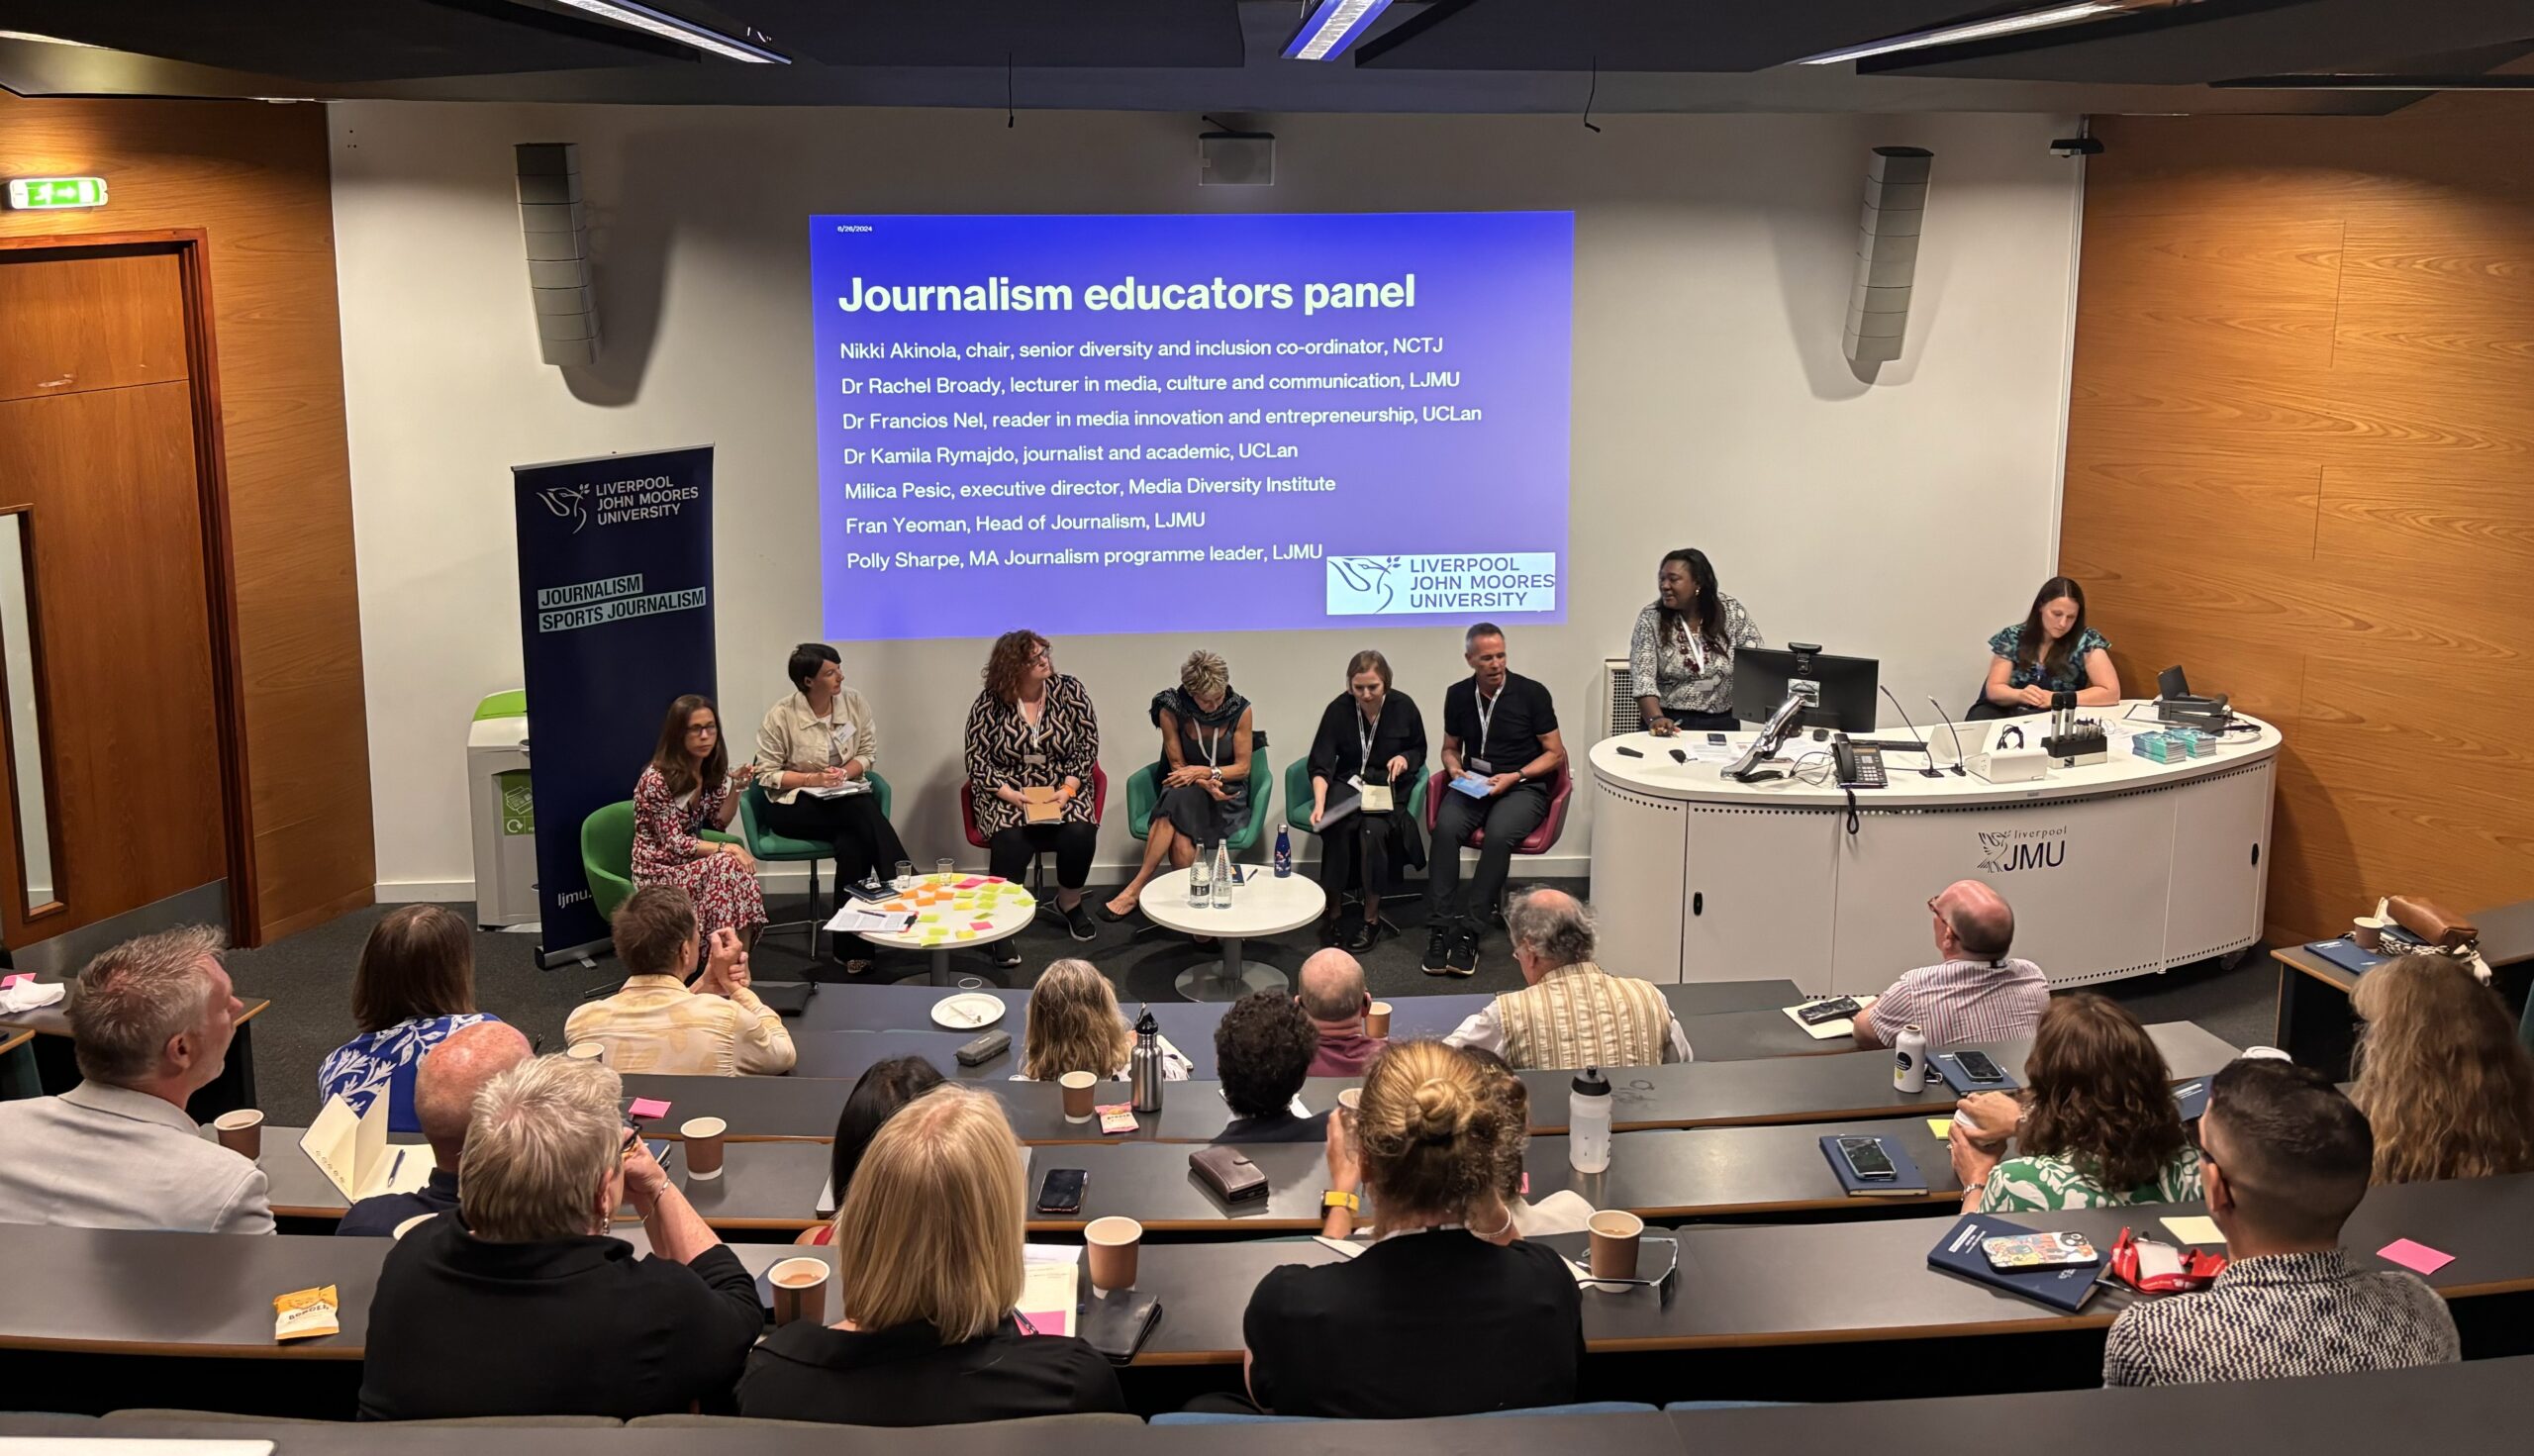 Video report: equality, diversity and inclusivity teaching conference at LJMU [Video]